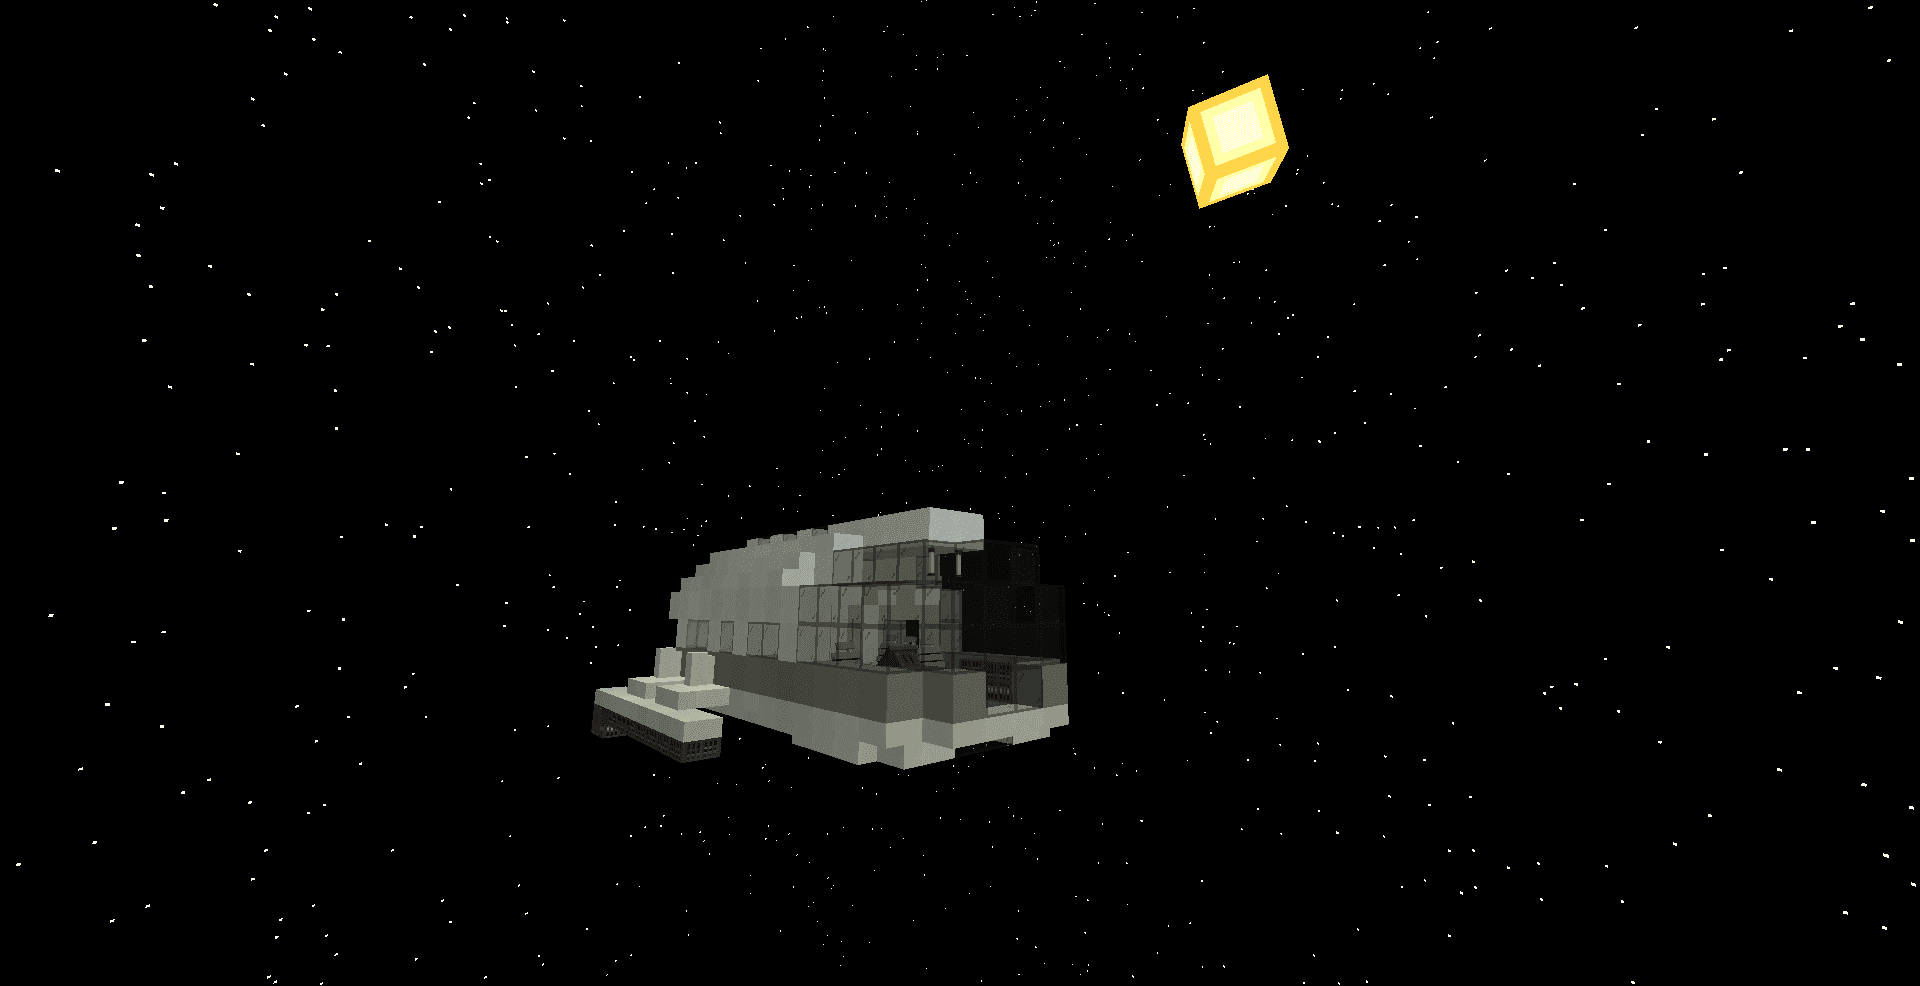 abandoned_spaceship_2.png